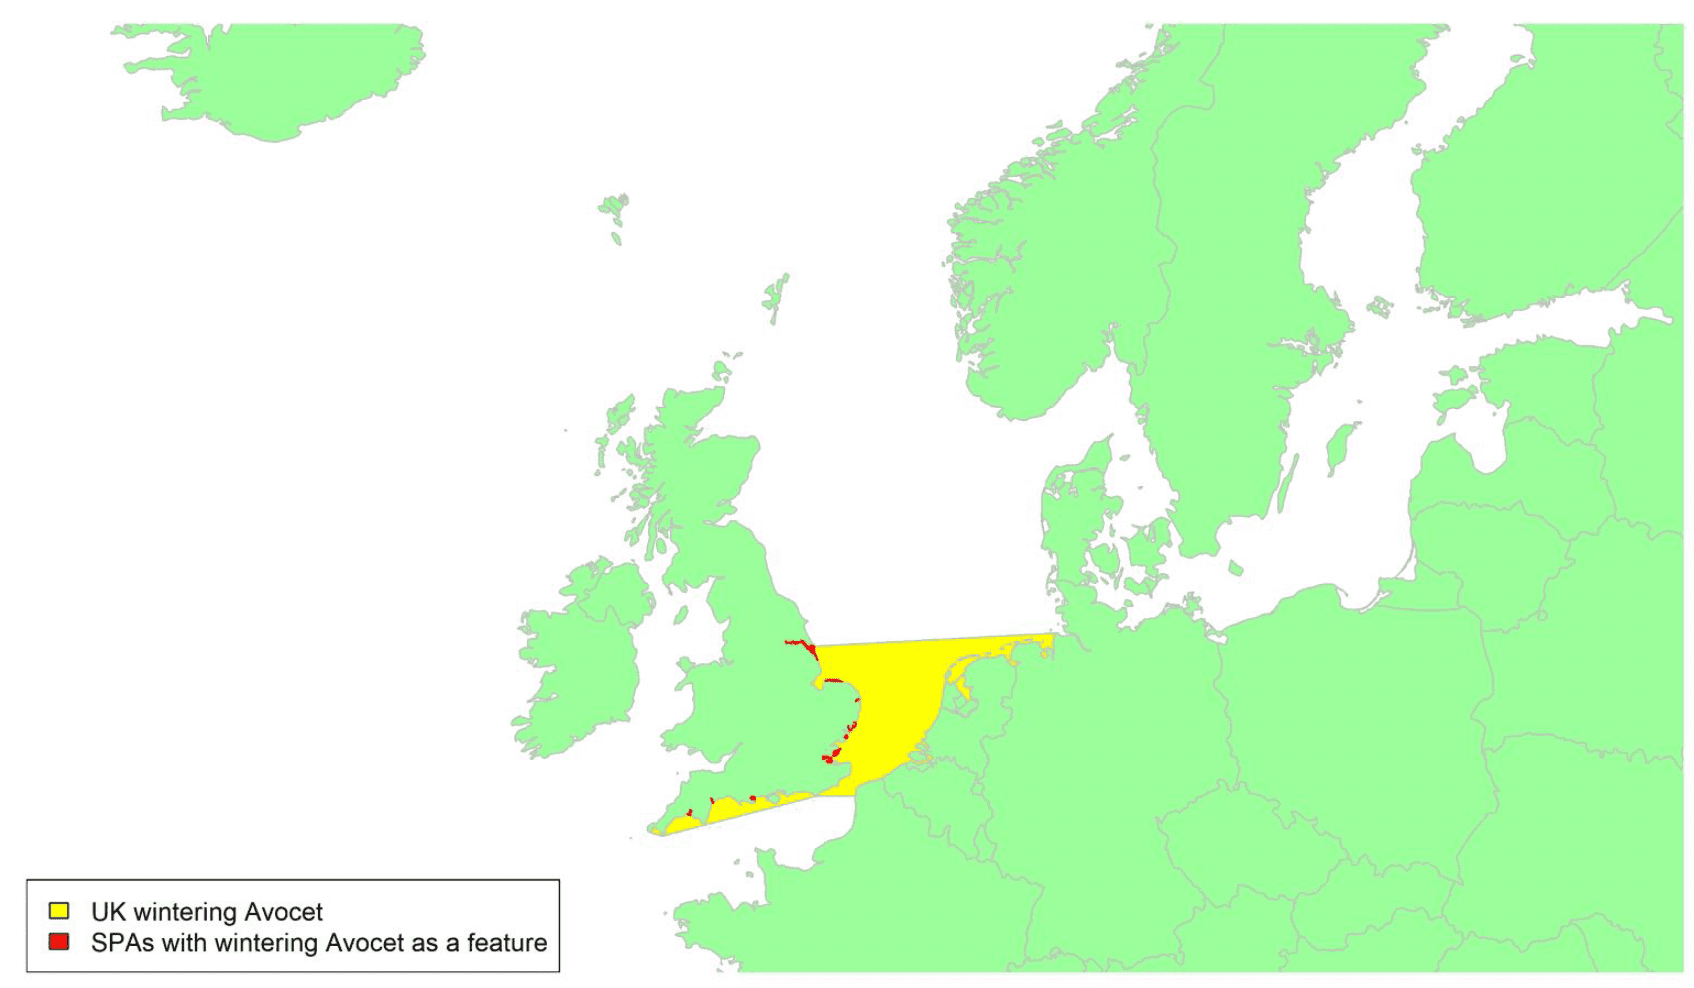 Map of North West Europe showing migratory routes and SPAs within the UK for wintering Avocet as described in the text below.